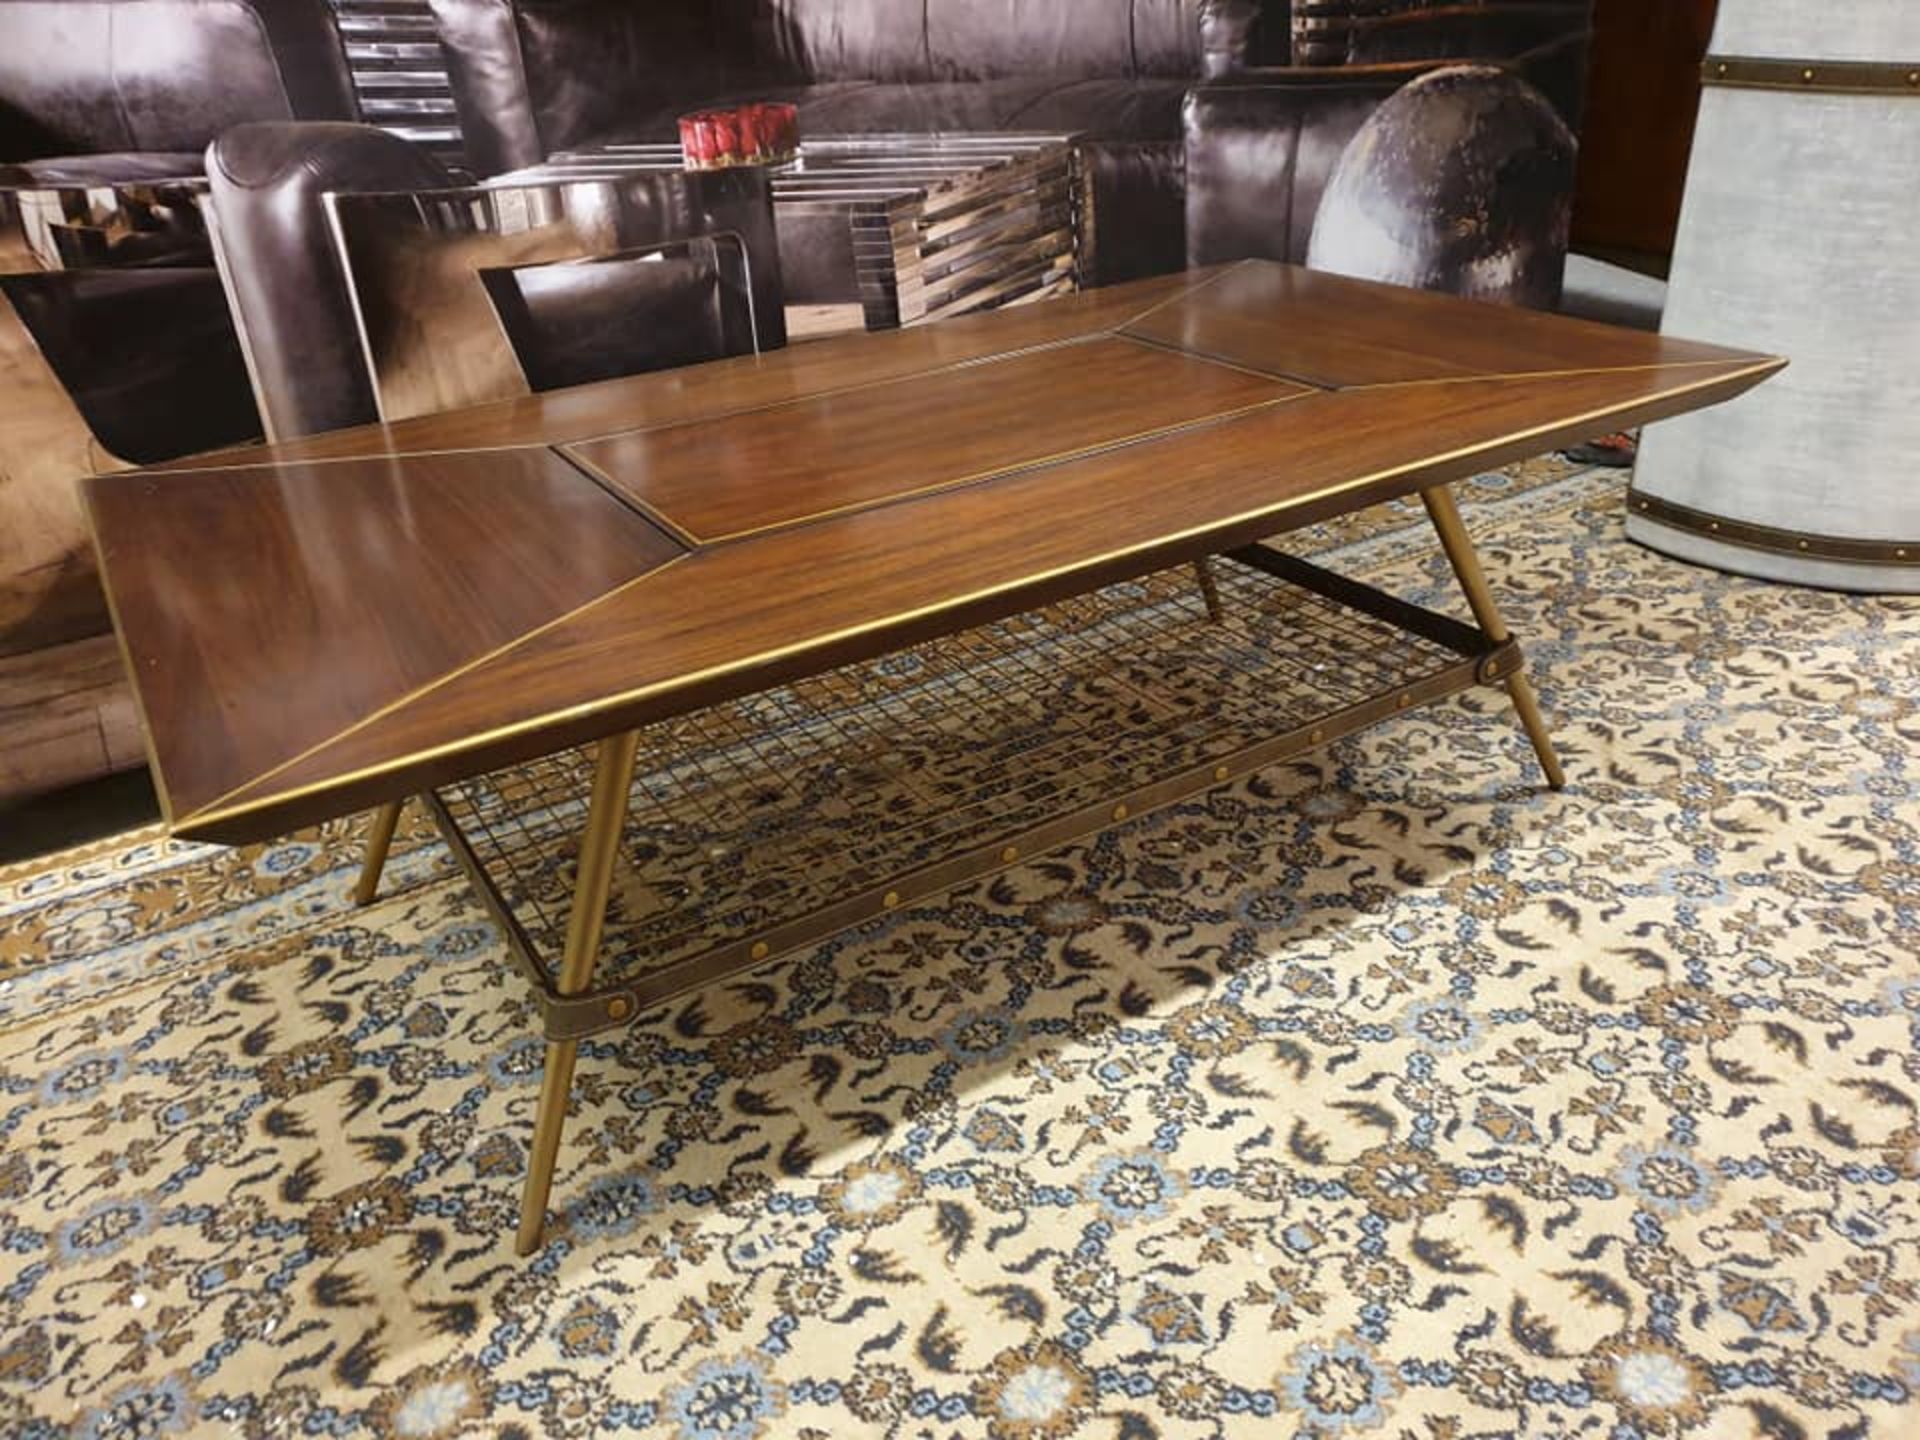 Starbay Acacia Walnut And Brass Inlay Rectangular Coffee Table Designed With Beautiful Clean Lines - Image 2 of 3